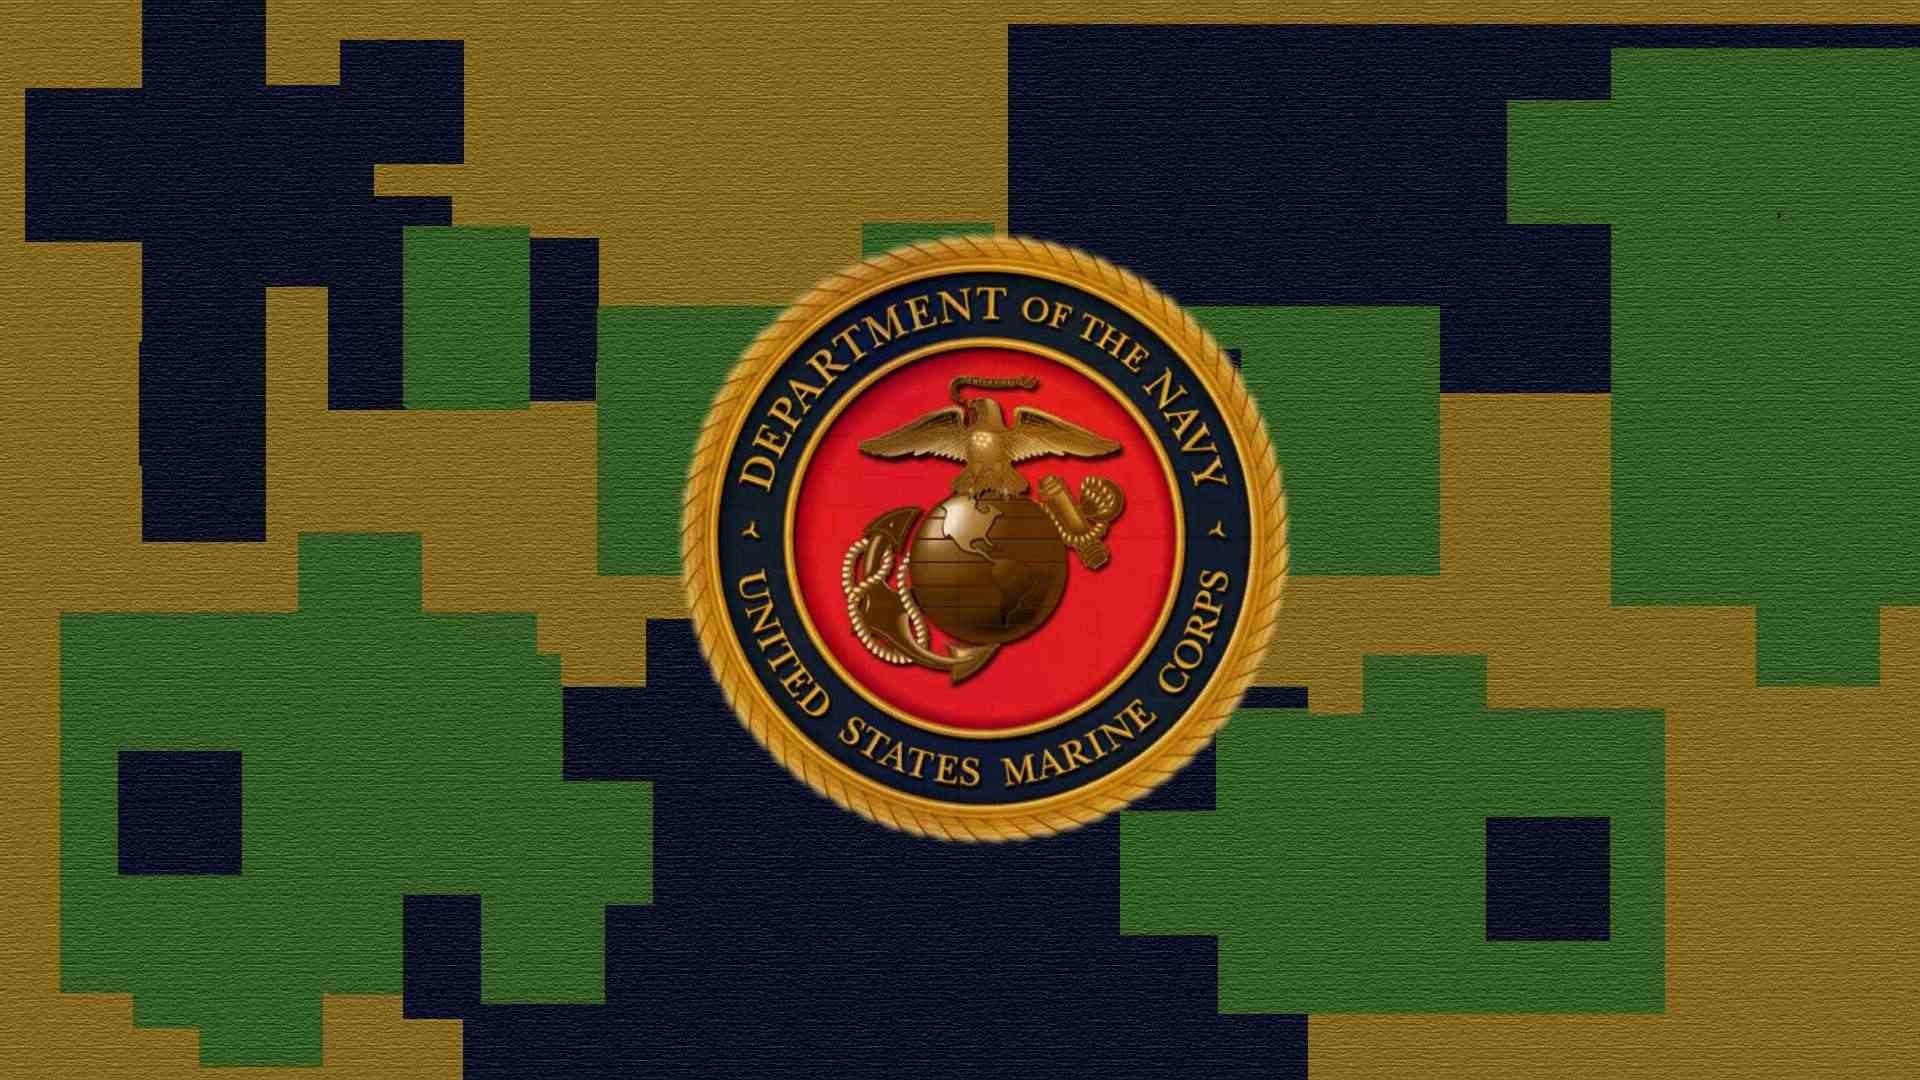 1920x1080 Pictures united states marine corps iphone wallpapers iphone themes .